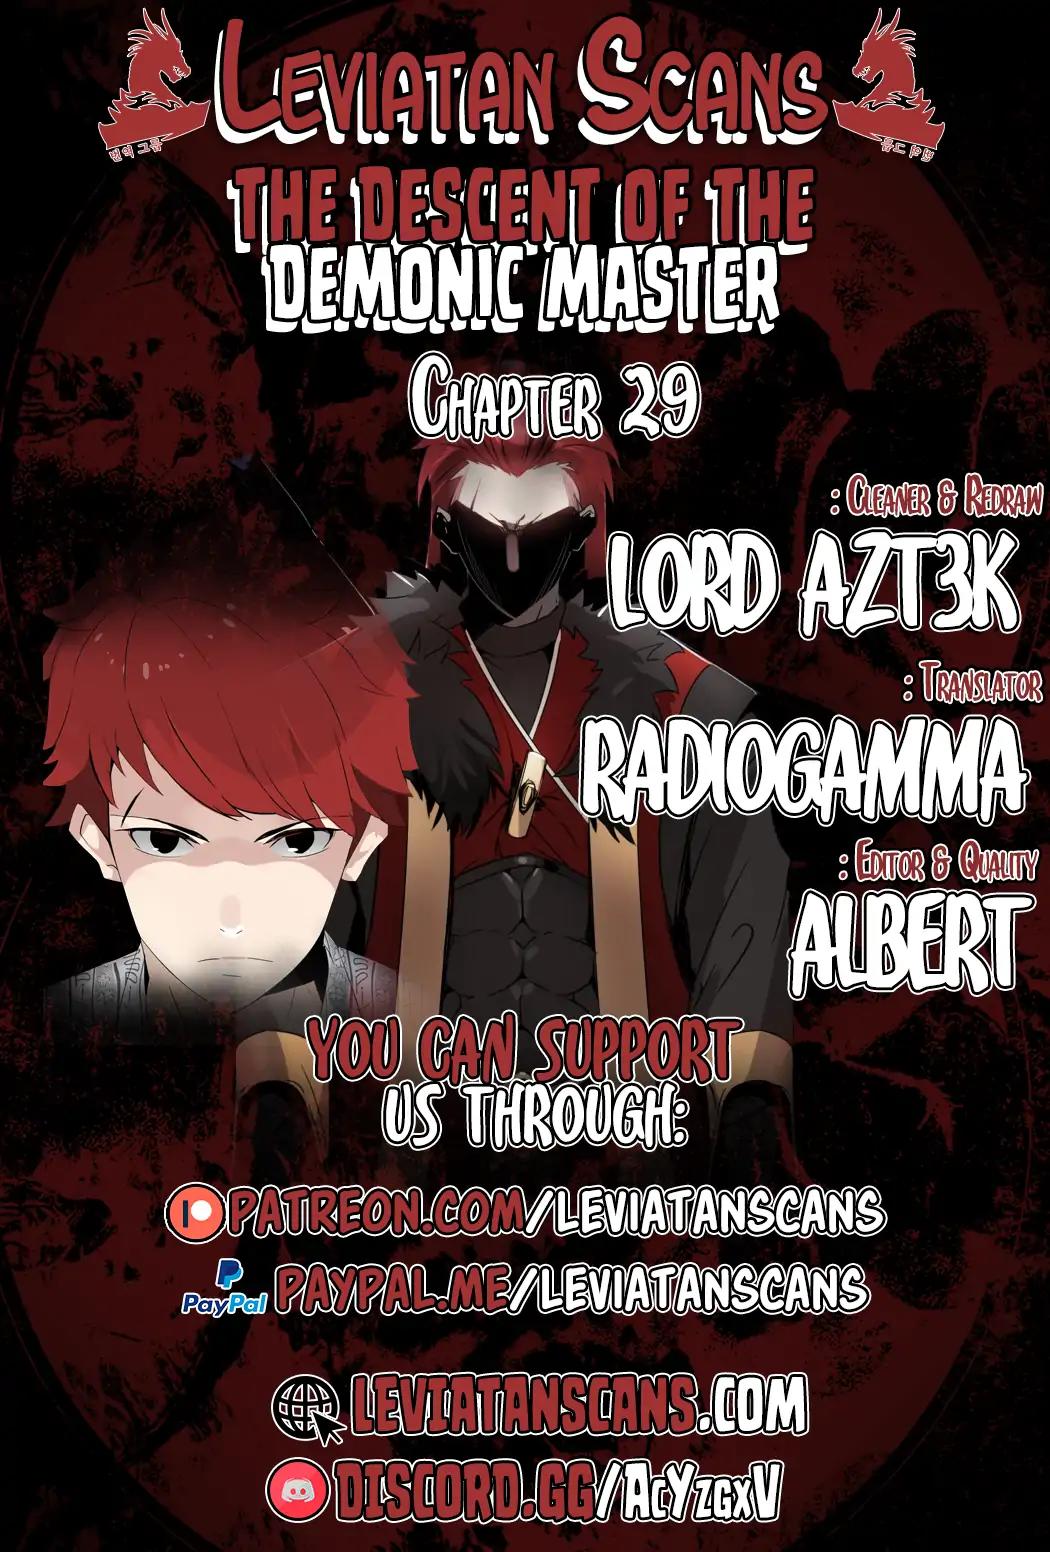 The Descent of the Demonic Master Chapter 29